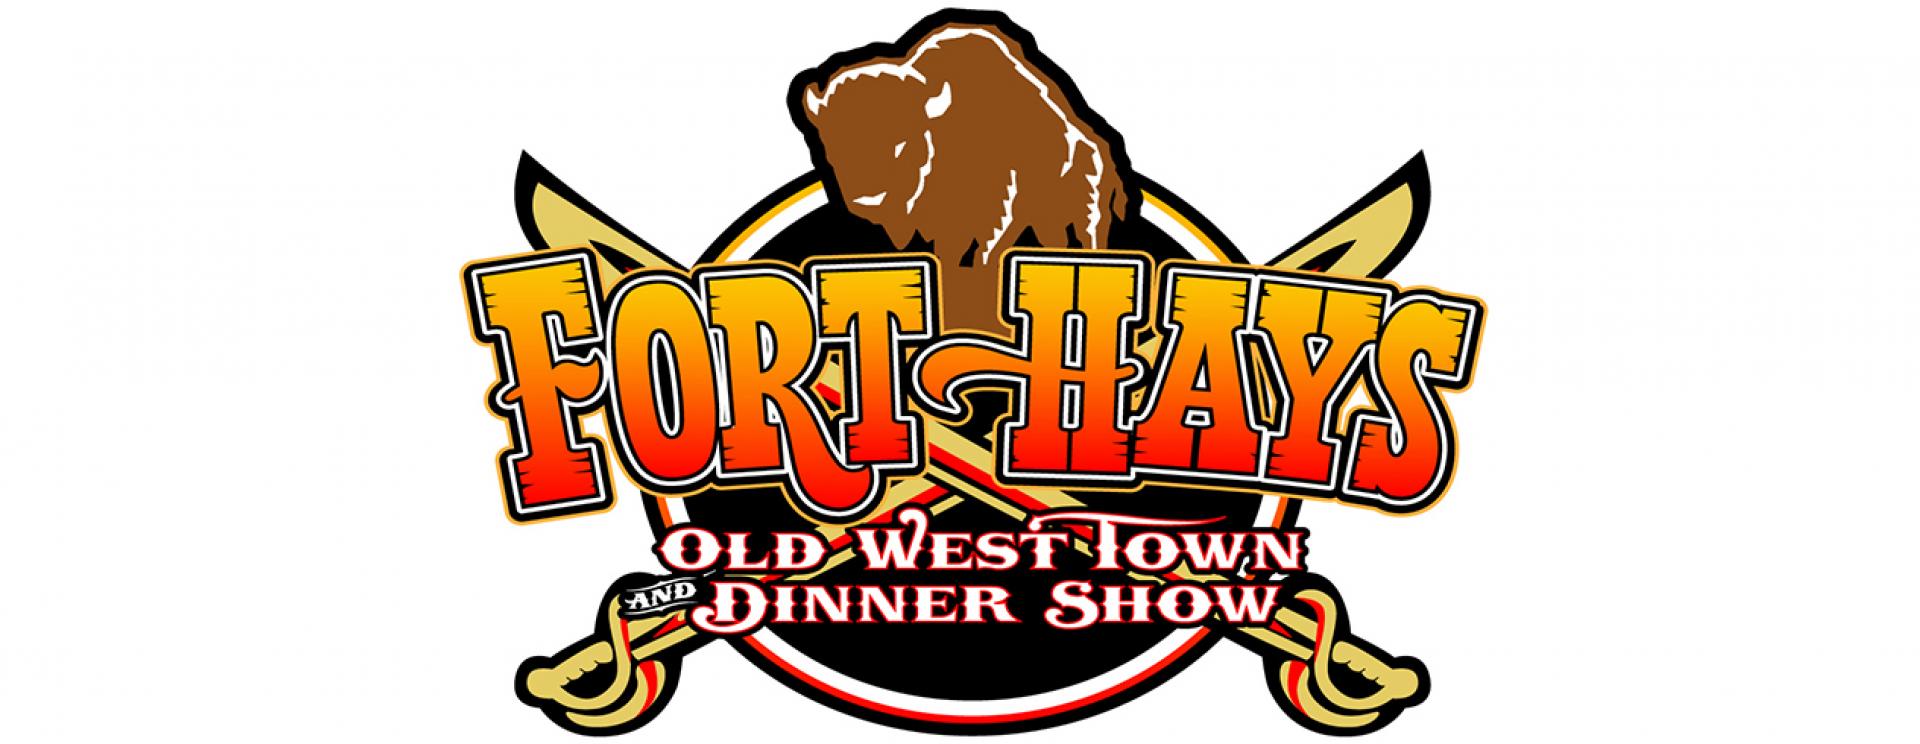 Fort Hays Old West Town & Dinner Show